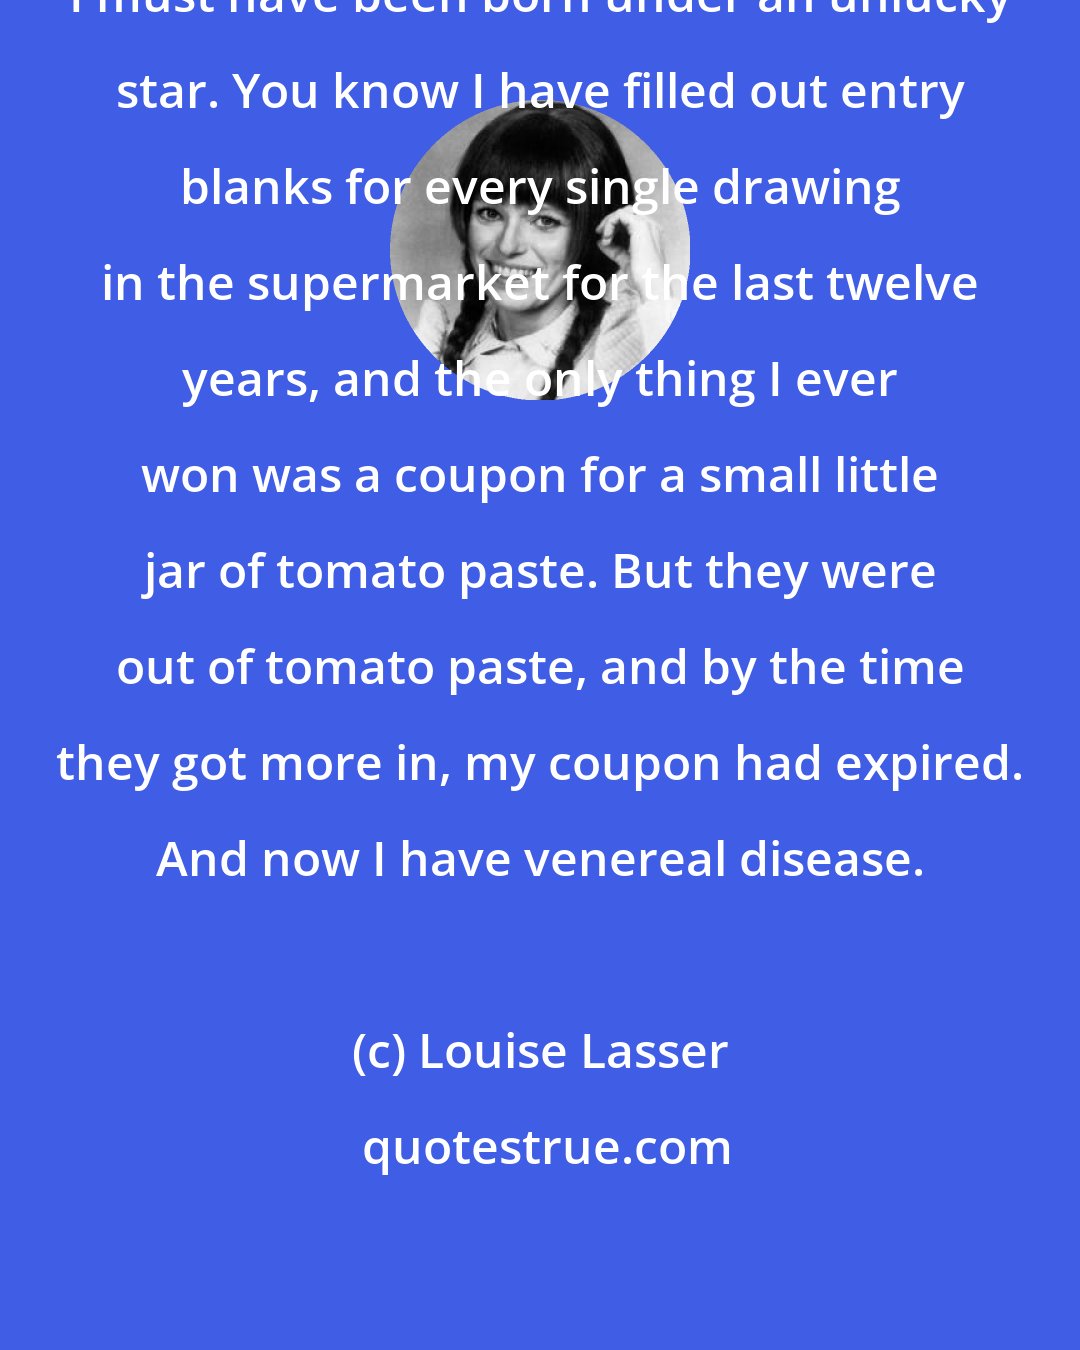 Louise Lasser: I must have been born under an unlucky star. You know I have filled out entry blanks for every single drawing in the supermarket for the last twelve years, and the only thing I ever won was a coupon for a small little jar of tomato paste. But they were out of tomato paste, and by the time they got more in, my coupon had expired. And now I have venereal disease.